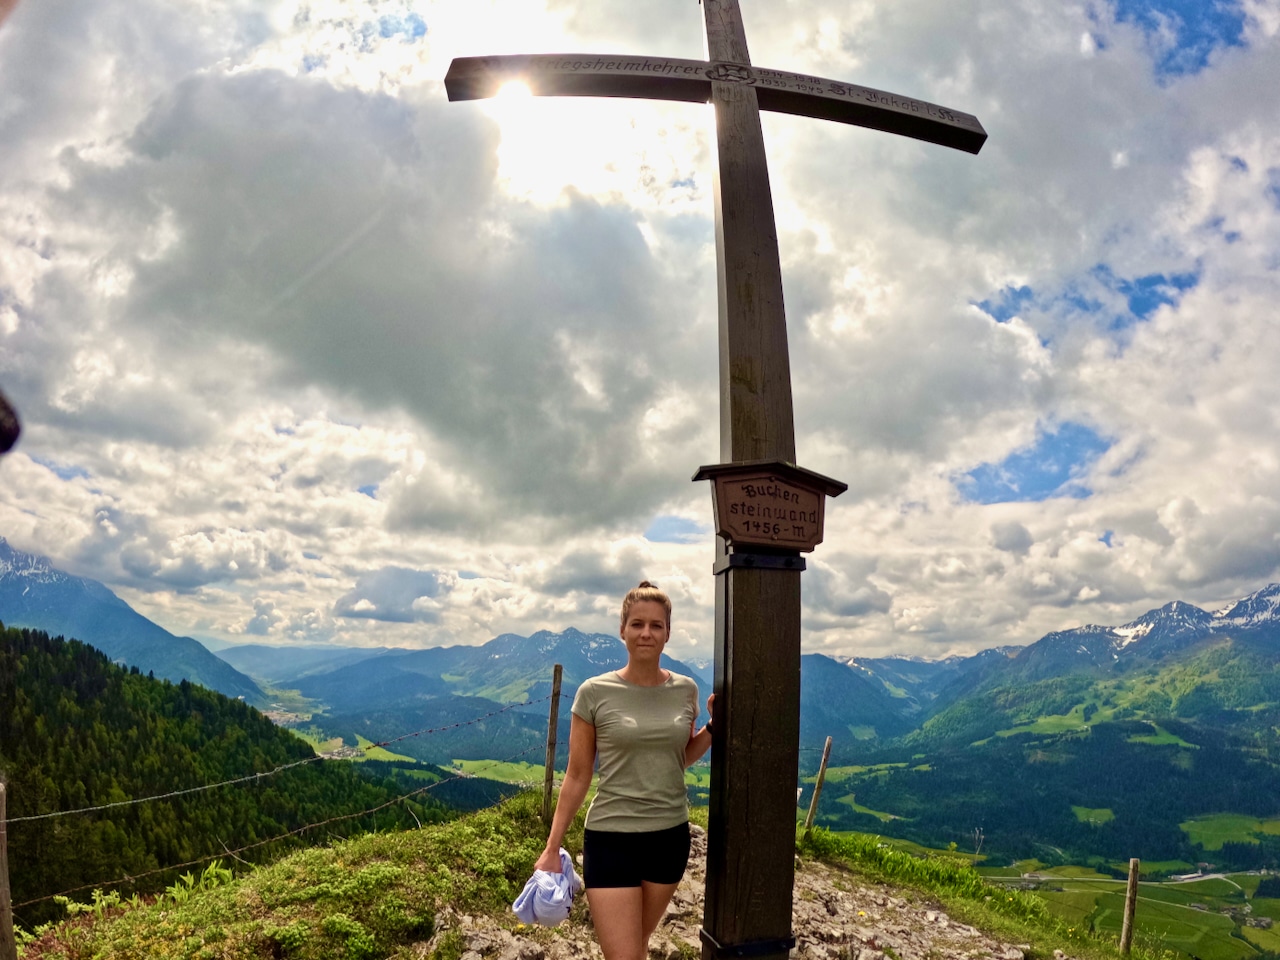 On to the summit: The summit cross of the Buchensteinwand is in the immediate vicinity of the mountain station of the chairlift. Bergbahnen Fieberbrunn Bergbahnen Fieberbrunn & PillerseeTal – my experience report